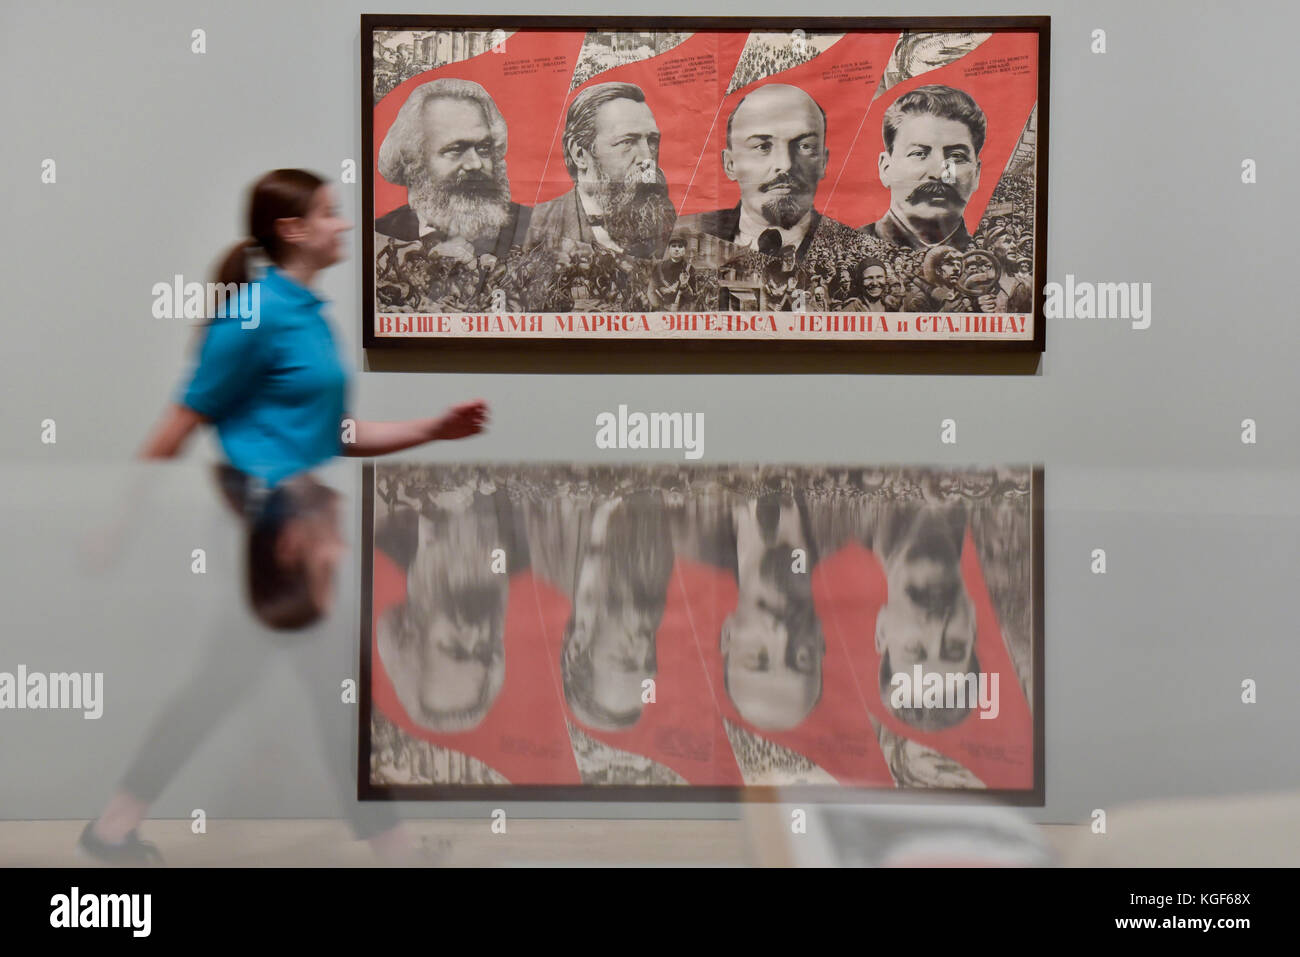 London, UK. 7th Nov, 2017. A student from Thomas Tallis School, Kidbrooke, south London, walks by 'Under the Banner of Marx, Engels, Lenin and Stalin!', 1933, by Gustav Klutsis, at a preview of 'Red Star Over Russia: A Revolution in Visual Culture 1905-55' at Tate Modern. The exhibition marks the centenary of the October Revolution and presents the visual history of Russia and the Soviet Union with works drawn primarily from the collection of the late graphic designer David King. Credit: Stephen Chung/Alamy Live News Stock Photo